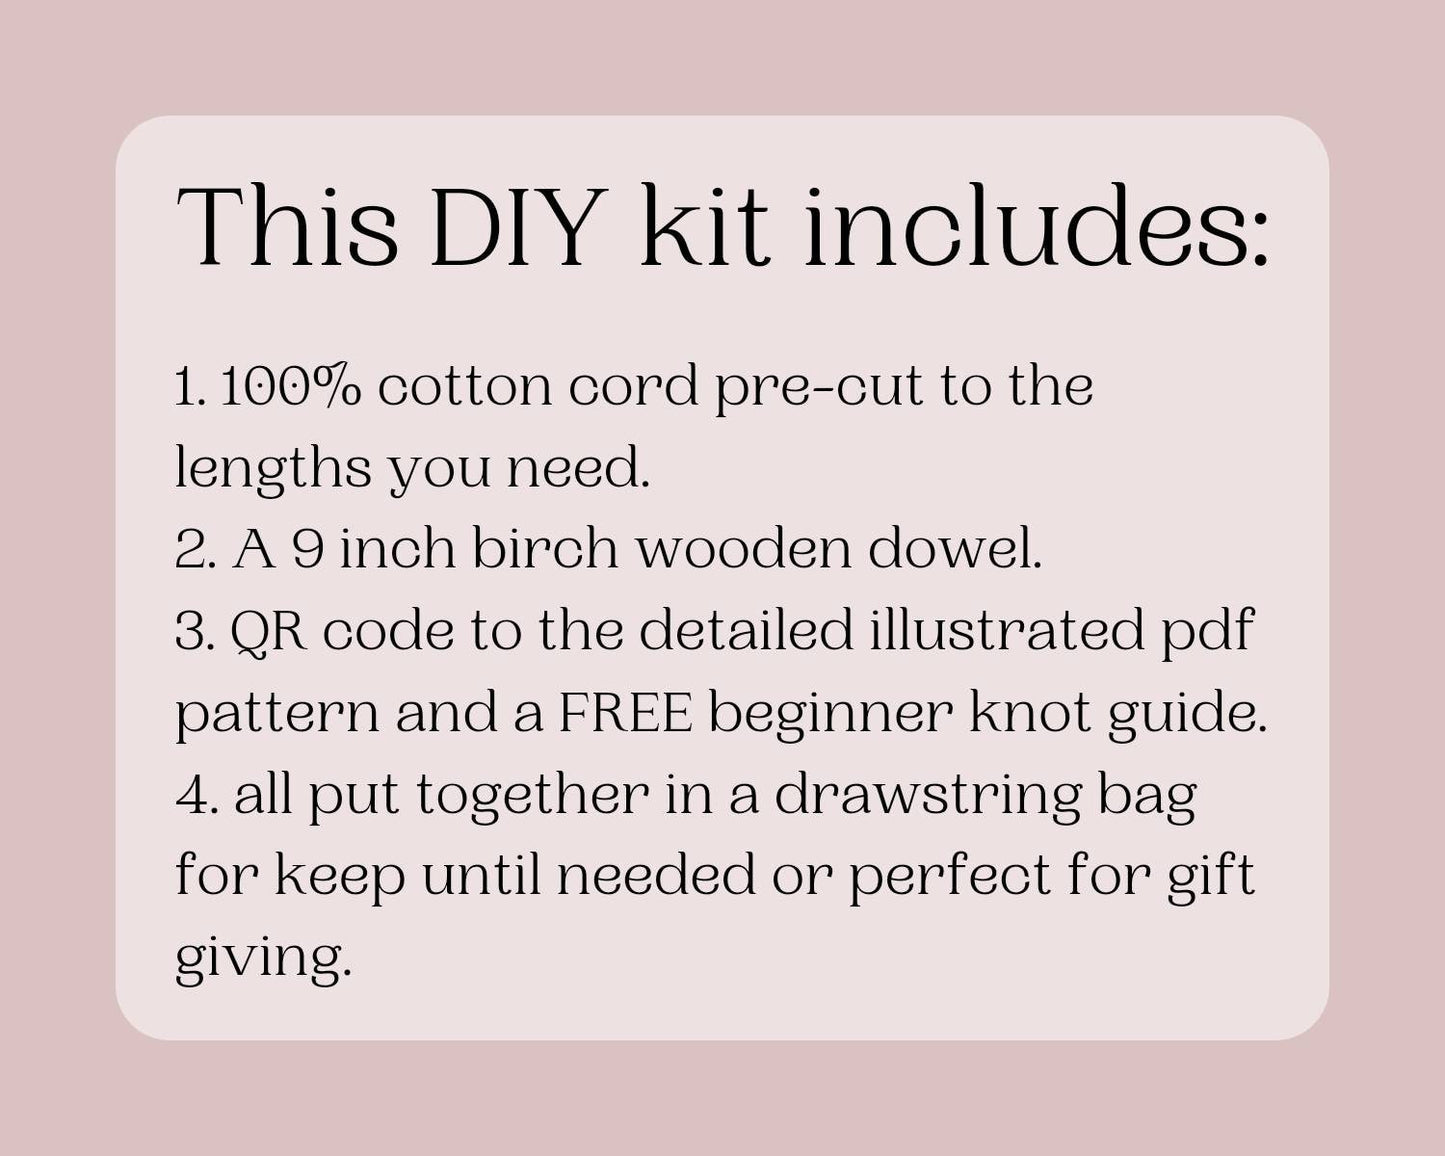 Beginner macrame heart wall hanging kit. Craft kits for adults and kids. Valentines day craft kit. Bohemian home and wall decor diy kit